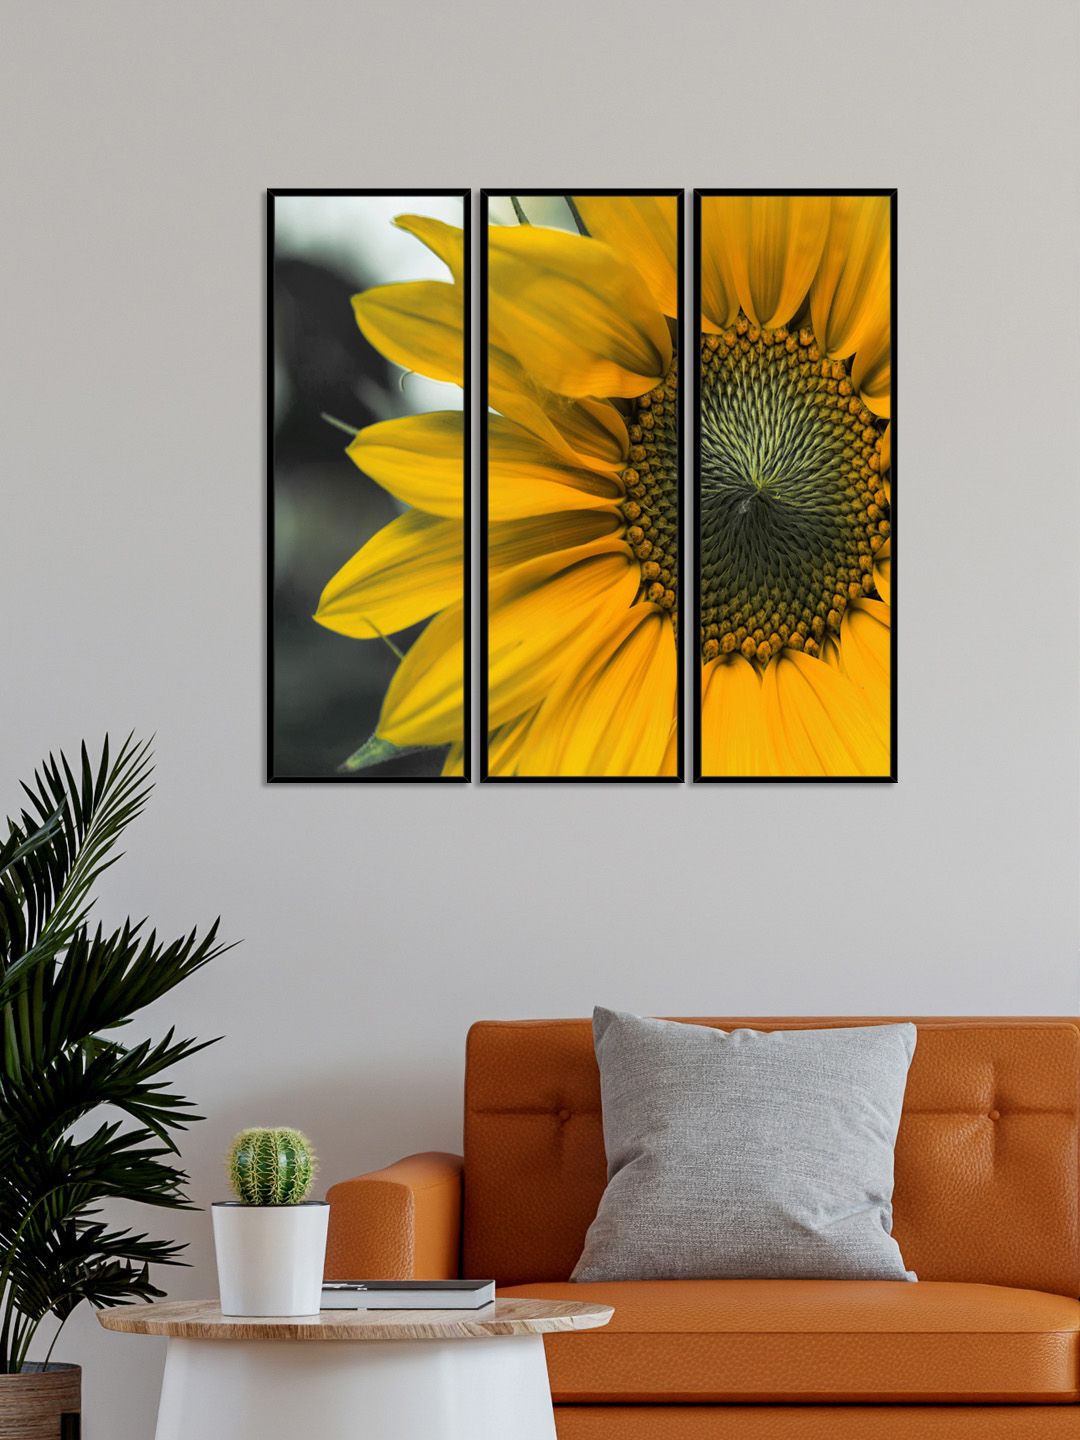 999Store Set Of 3 Yellow & Green Sunflower Wall Painting Price in India